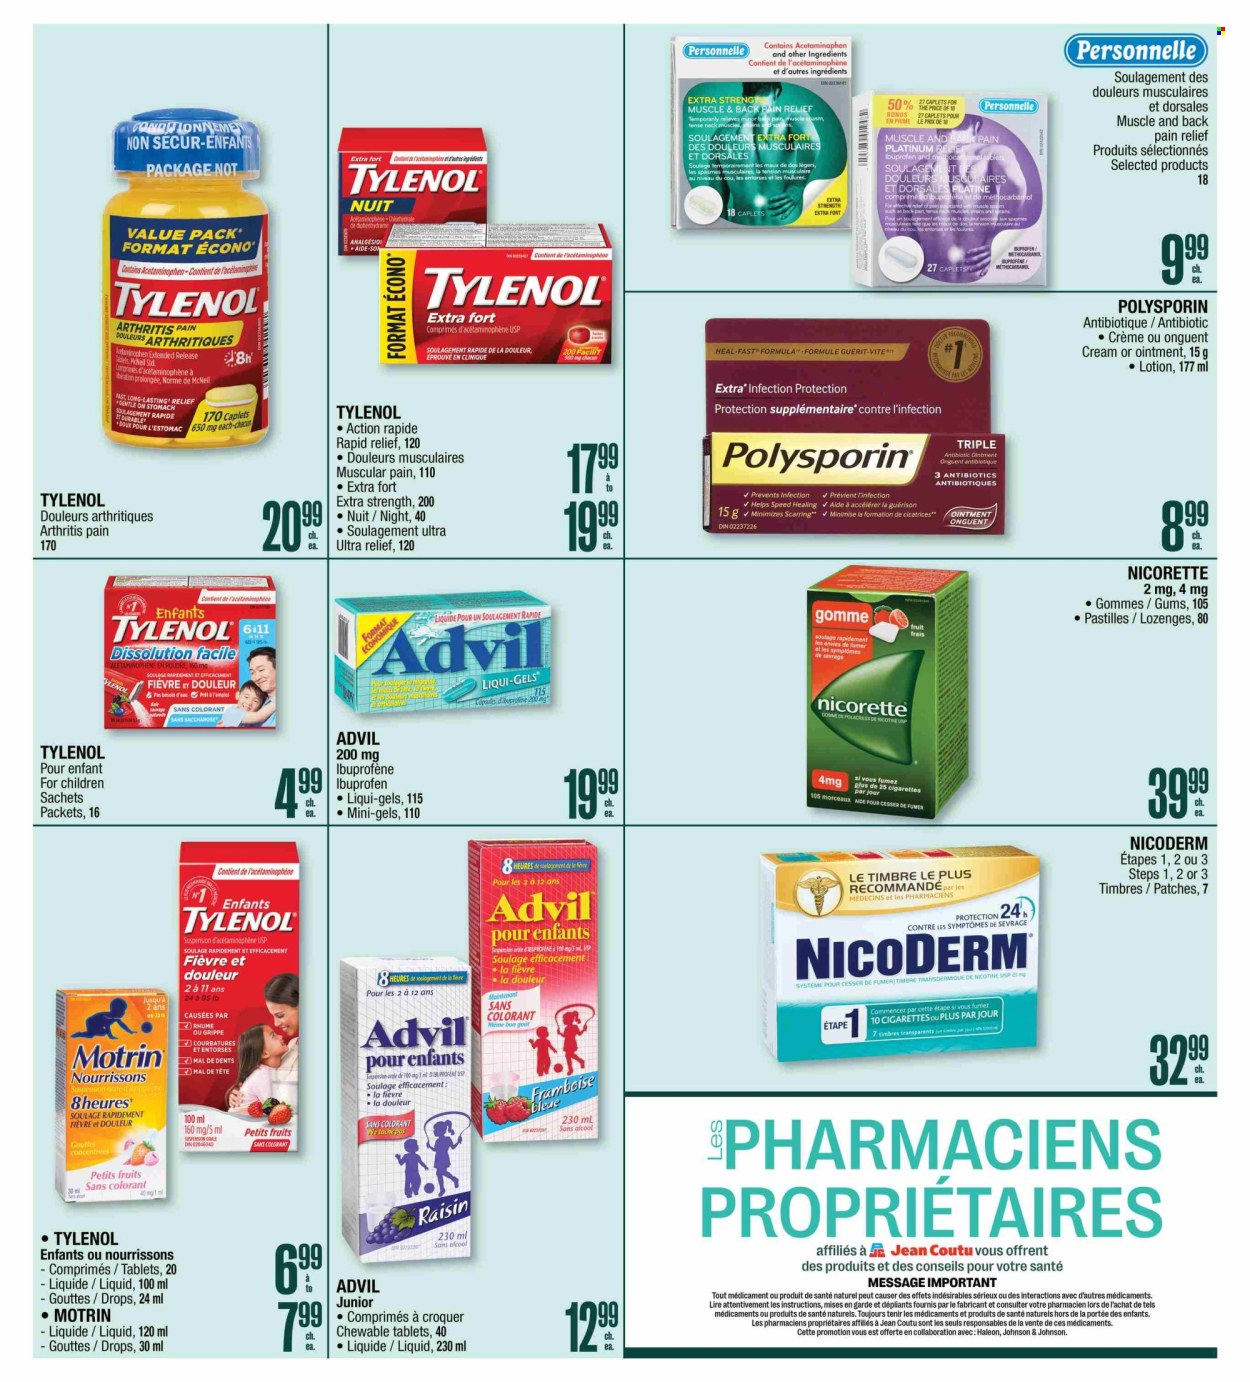 Jean Coutu flyer  - April 25, 2024 - May 01, 2024.